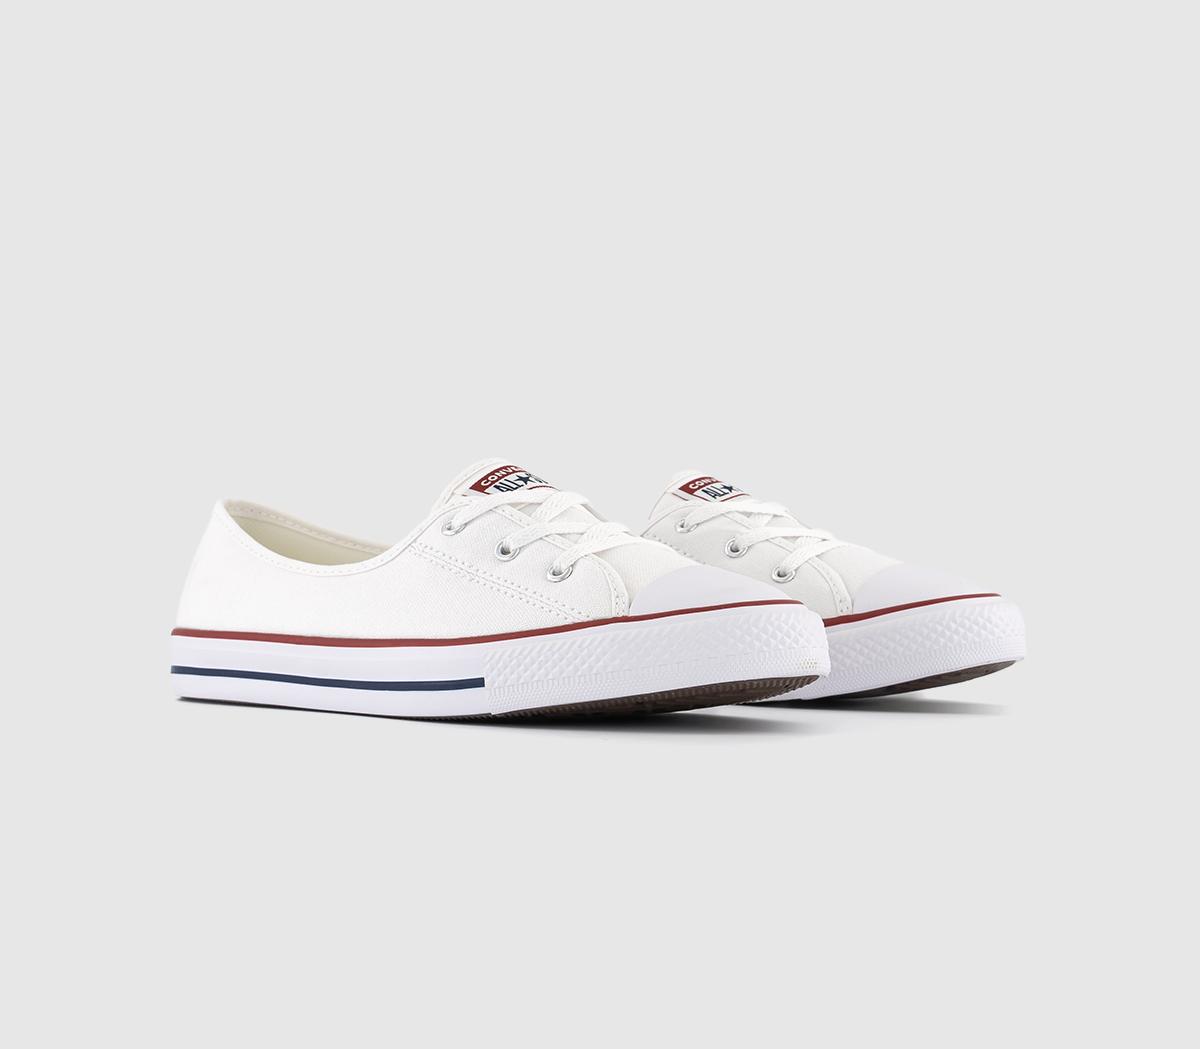 Converse Kids Ctas Ballet Lace White, Red And Blue Canvas Sneakers, 3-7, 5.5